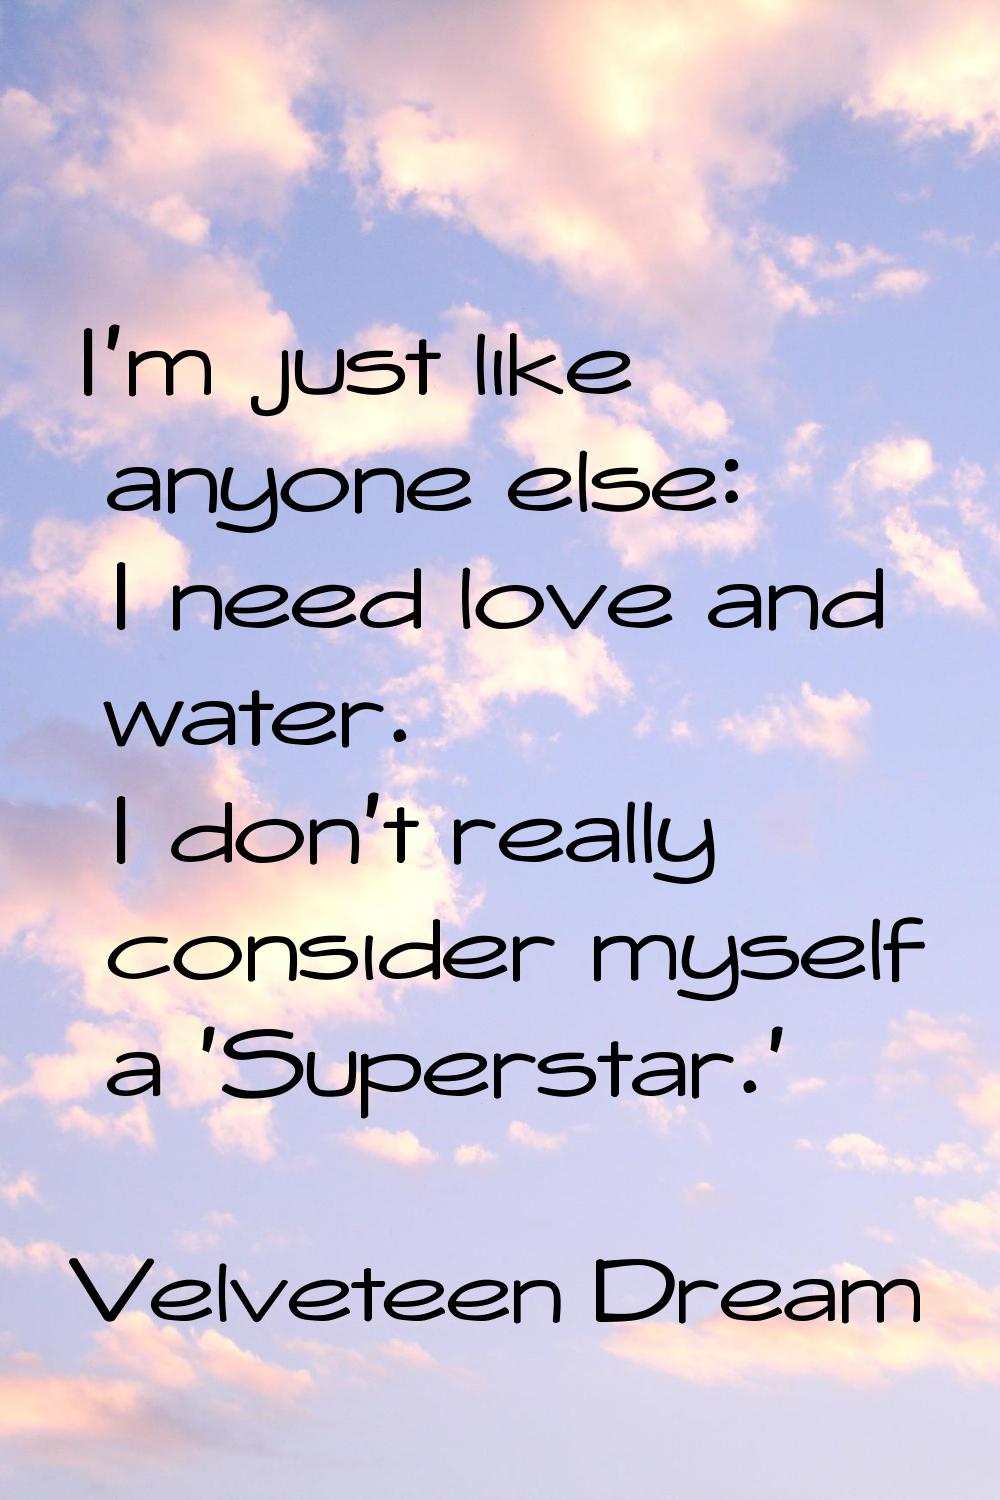 I'm just like anyone else: I need love and water. I don't really consider myself a 'Superstar.'